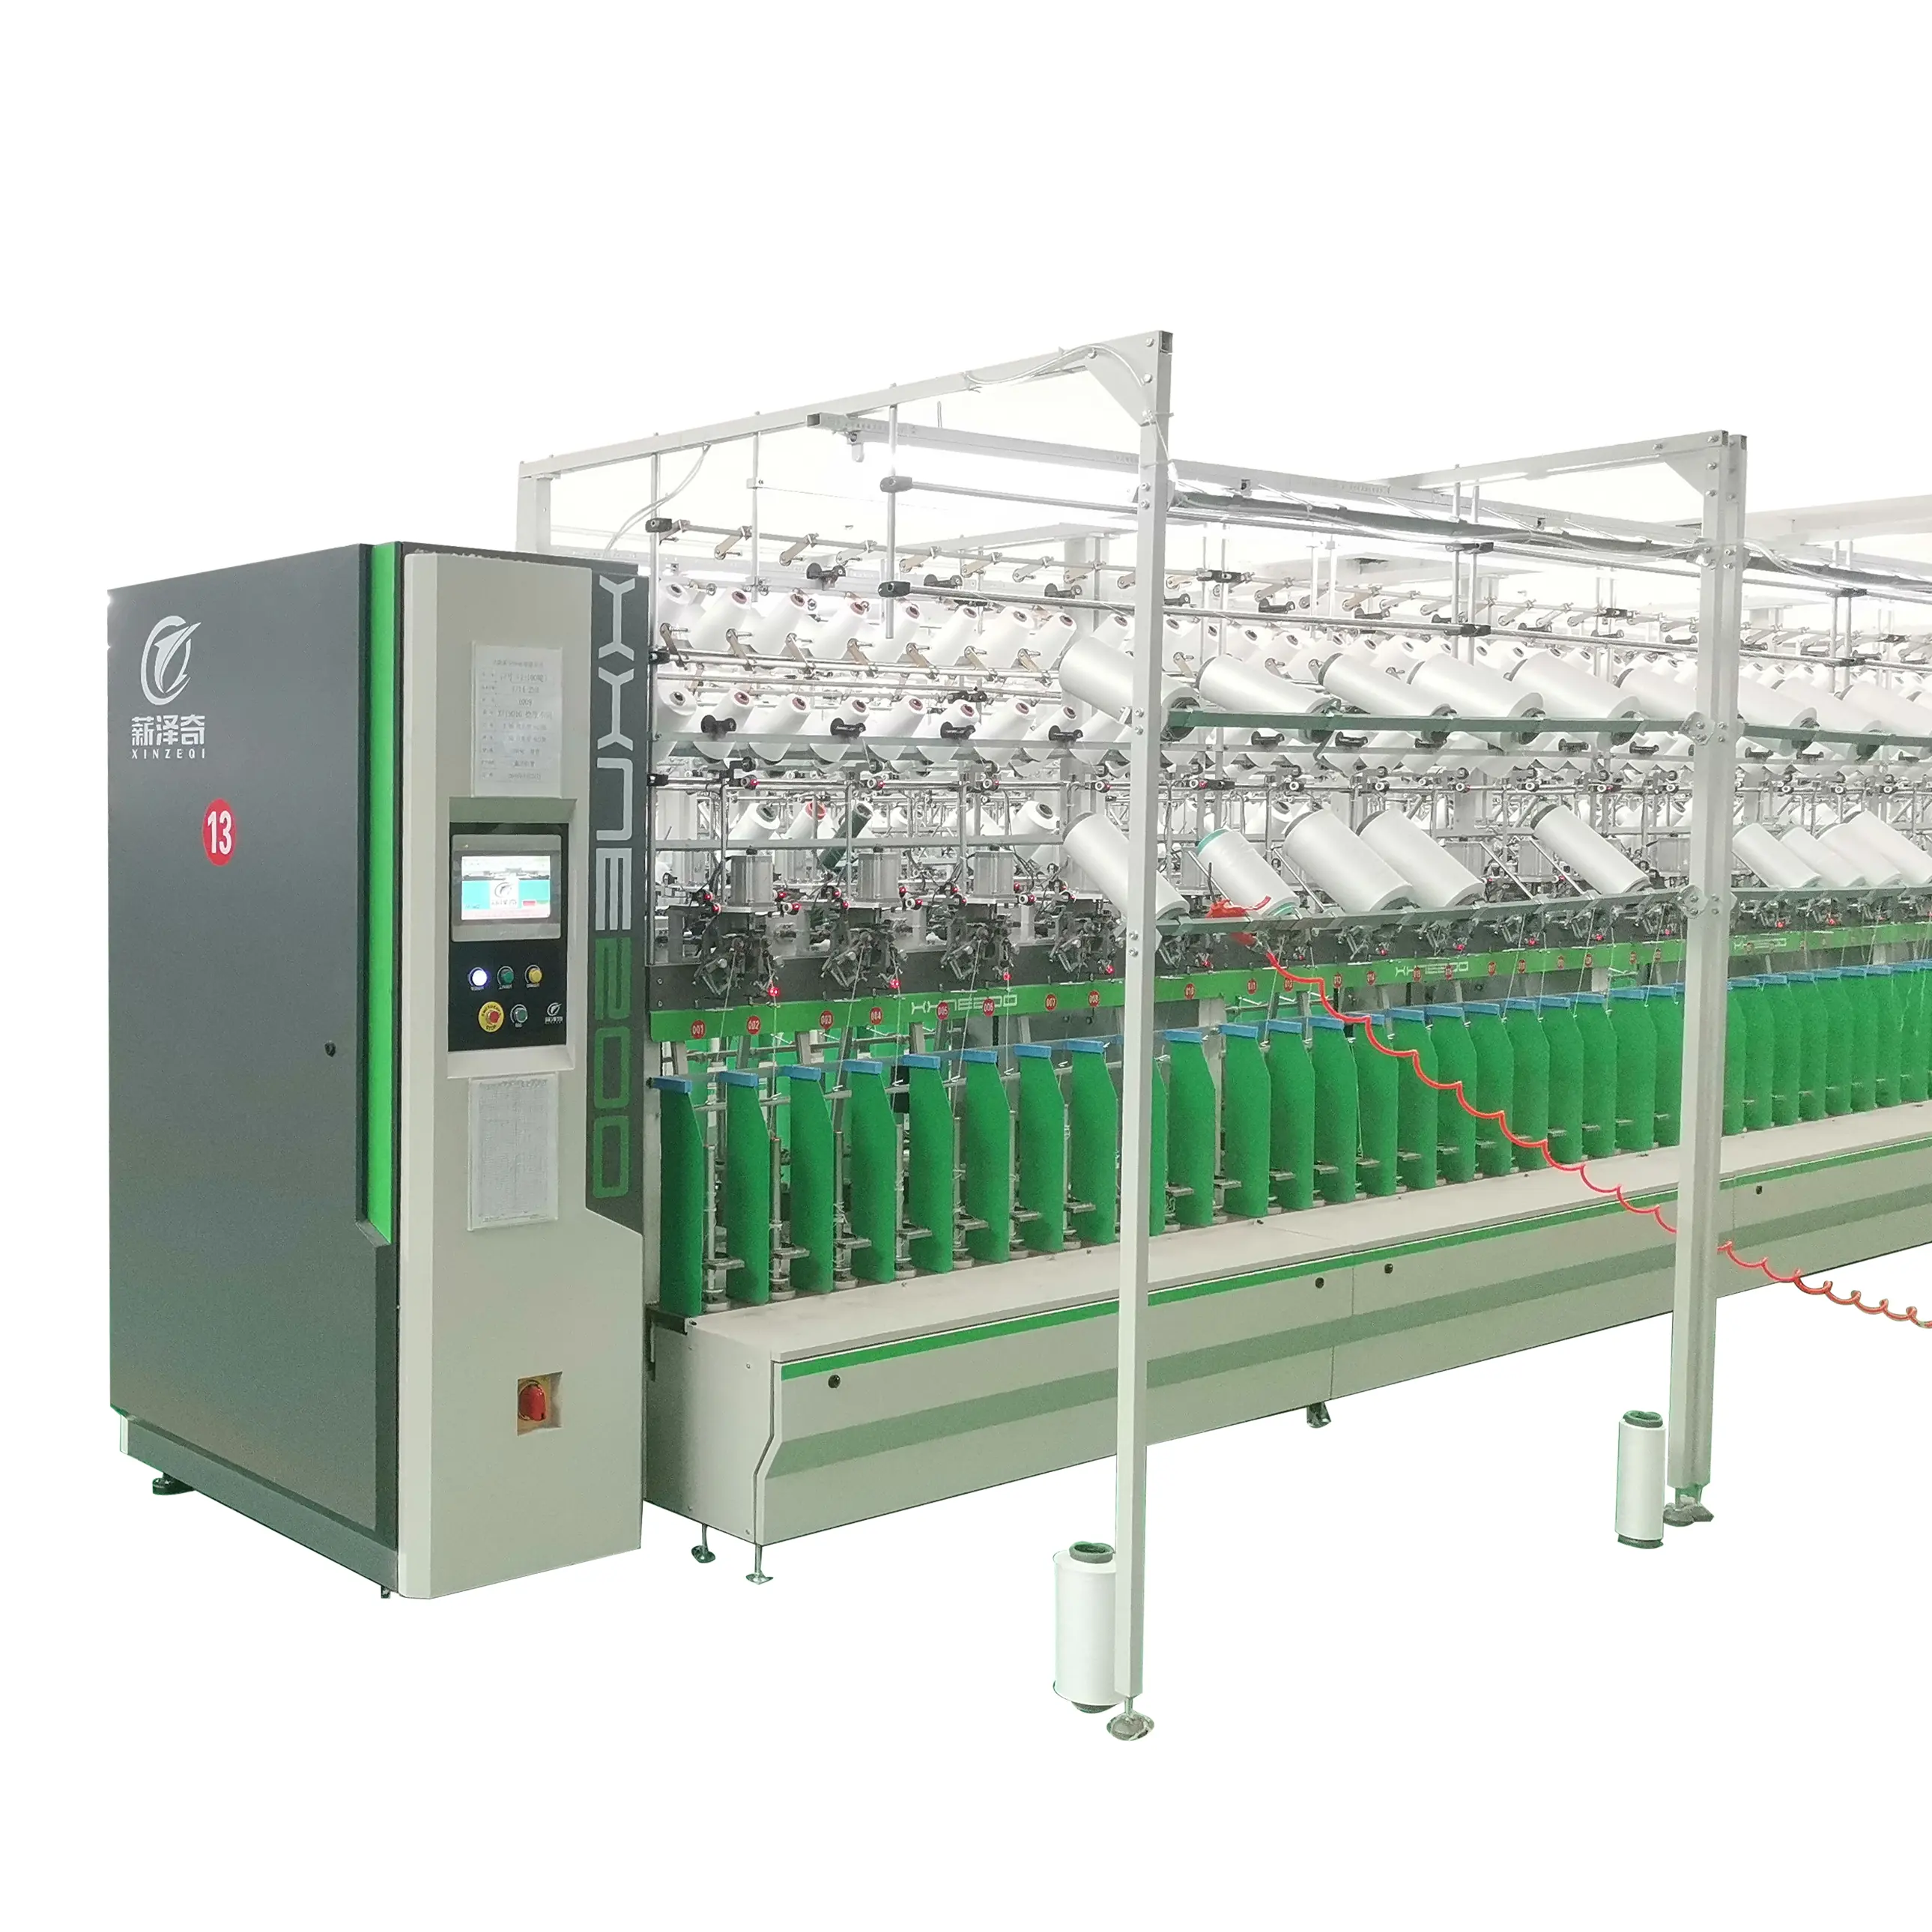 The latest double-sided Chenille machine is suitable for high quality fine count yarn